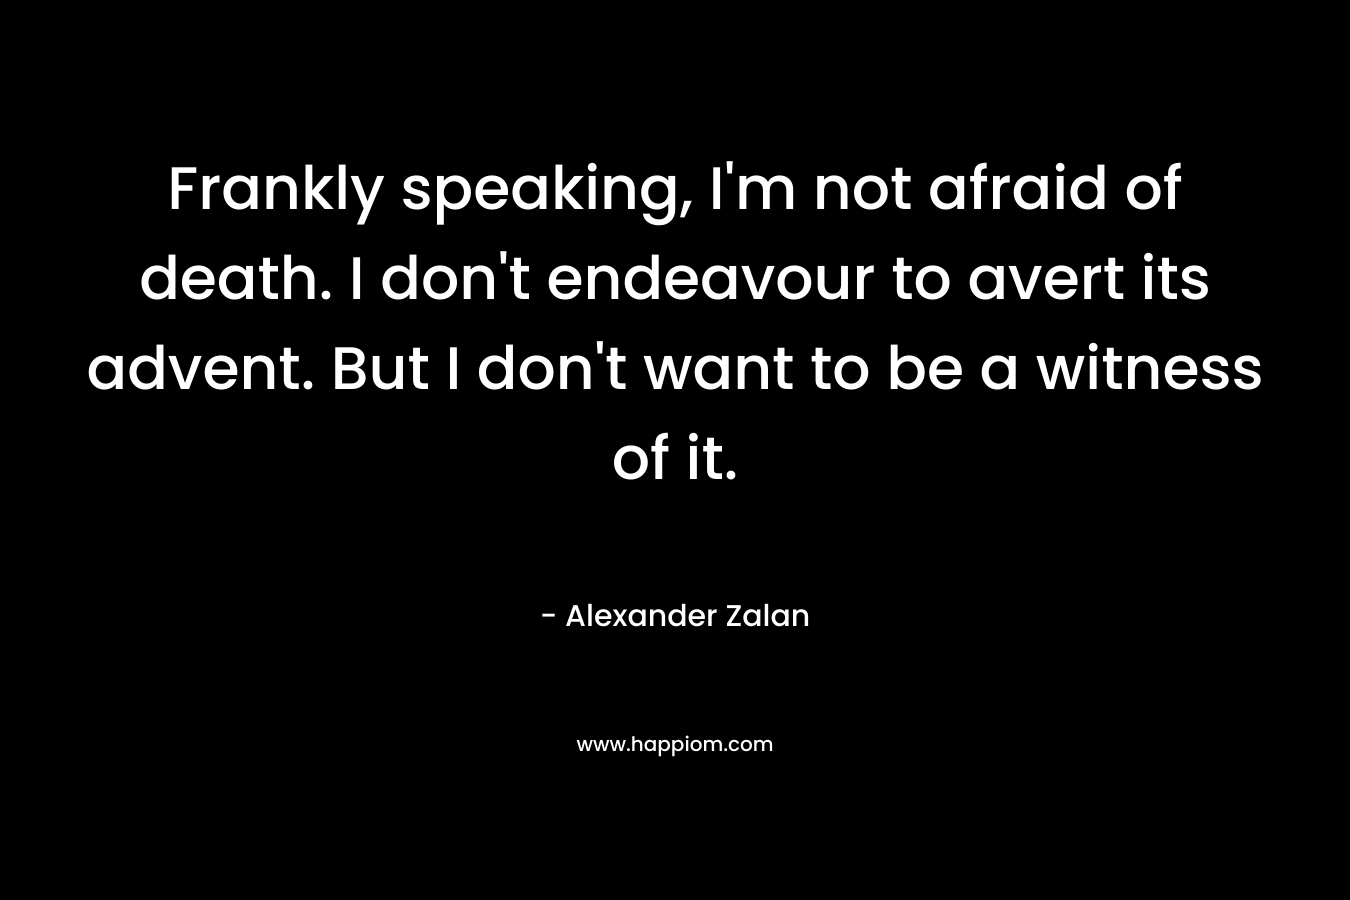 Frankly speaking, I'm not afraid of death. I don't endeavour to avert its advent. But I don't want to be a witness of it.